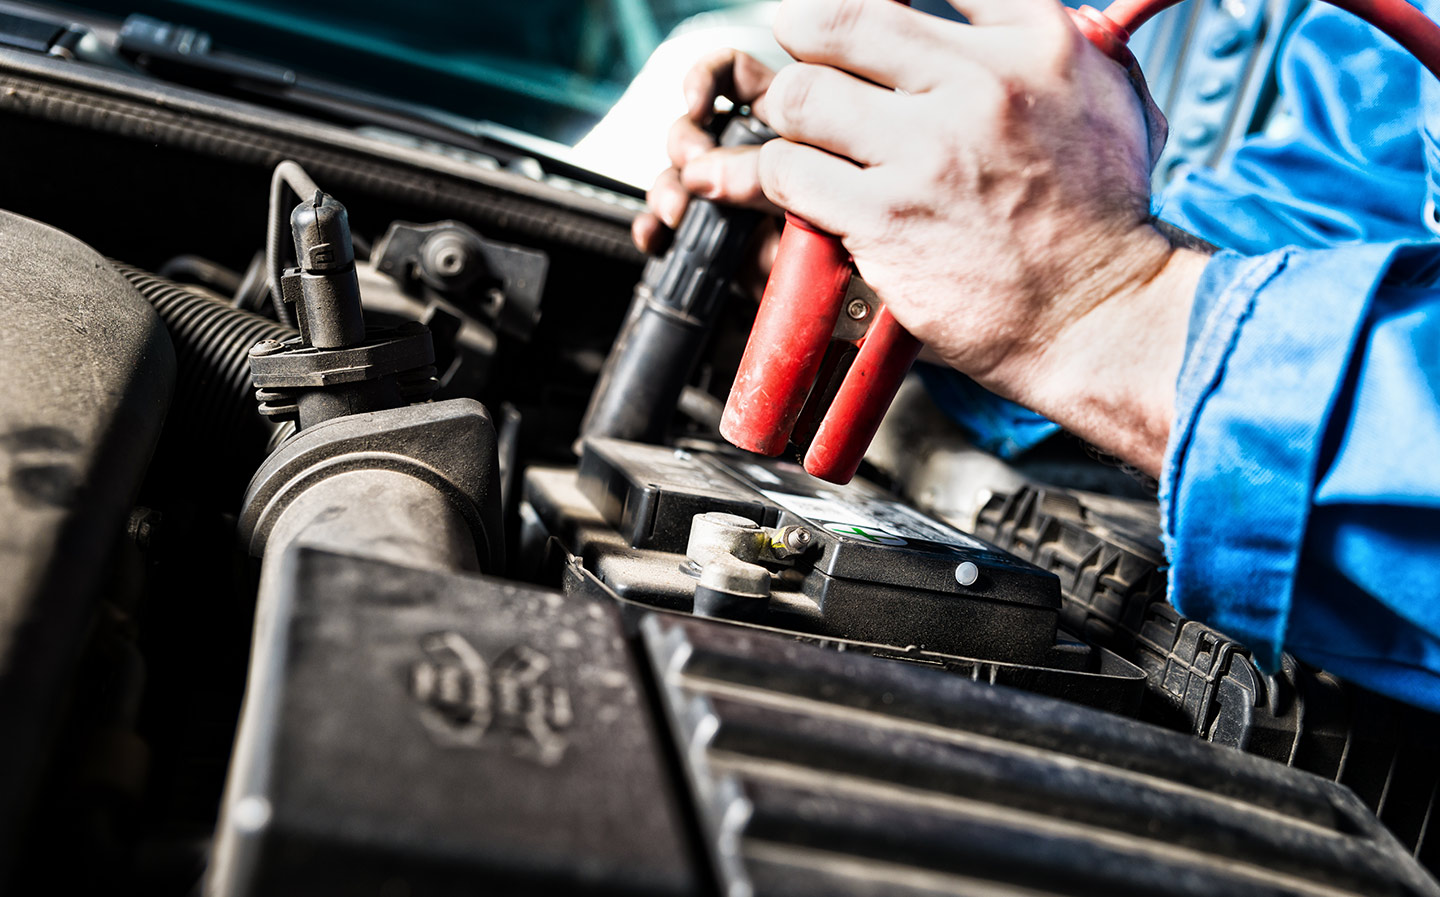 How to change a car battery